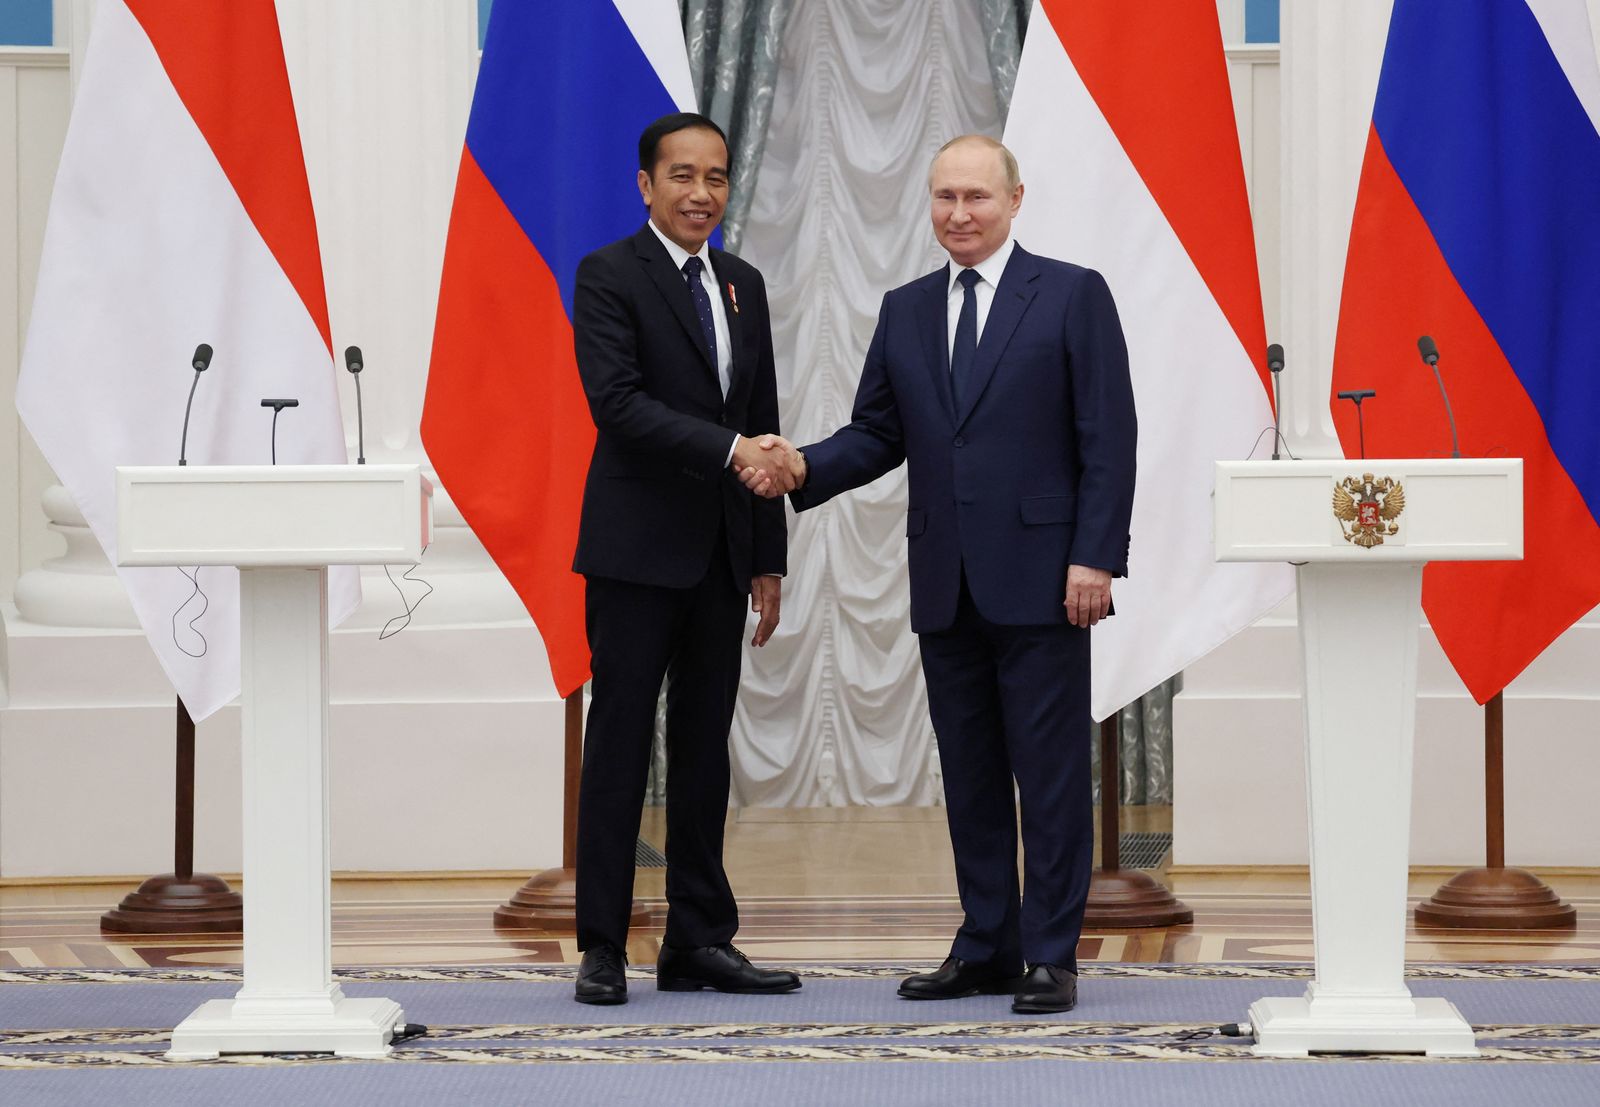 Russia's Putin meets his Indonesian counterpart Widodo in Moscow - via REUTERS